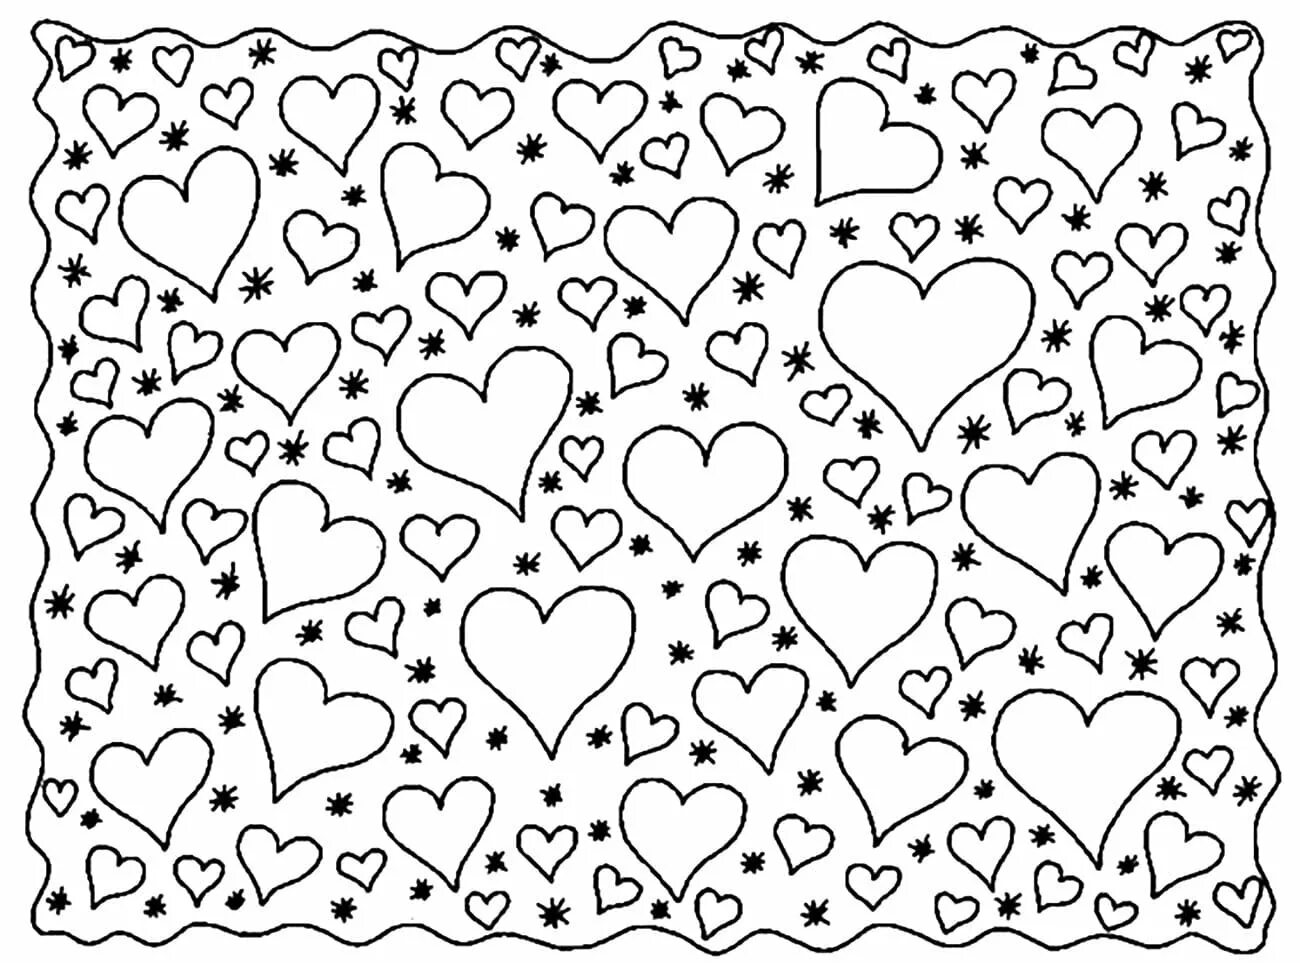 Color-lively heart lot coloring page